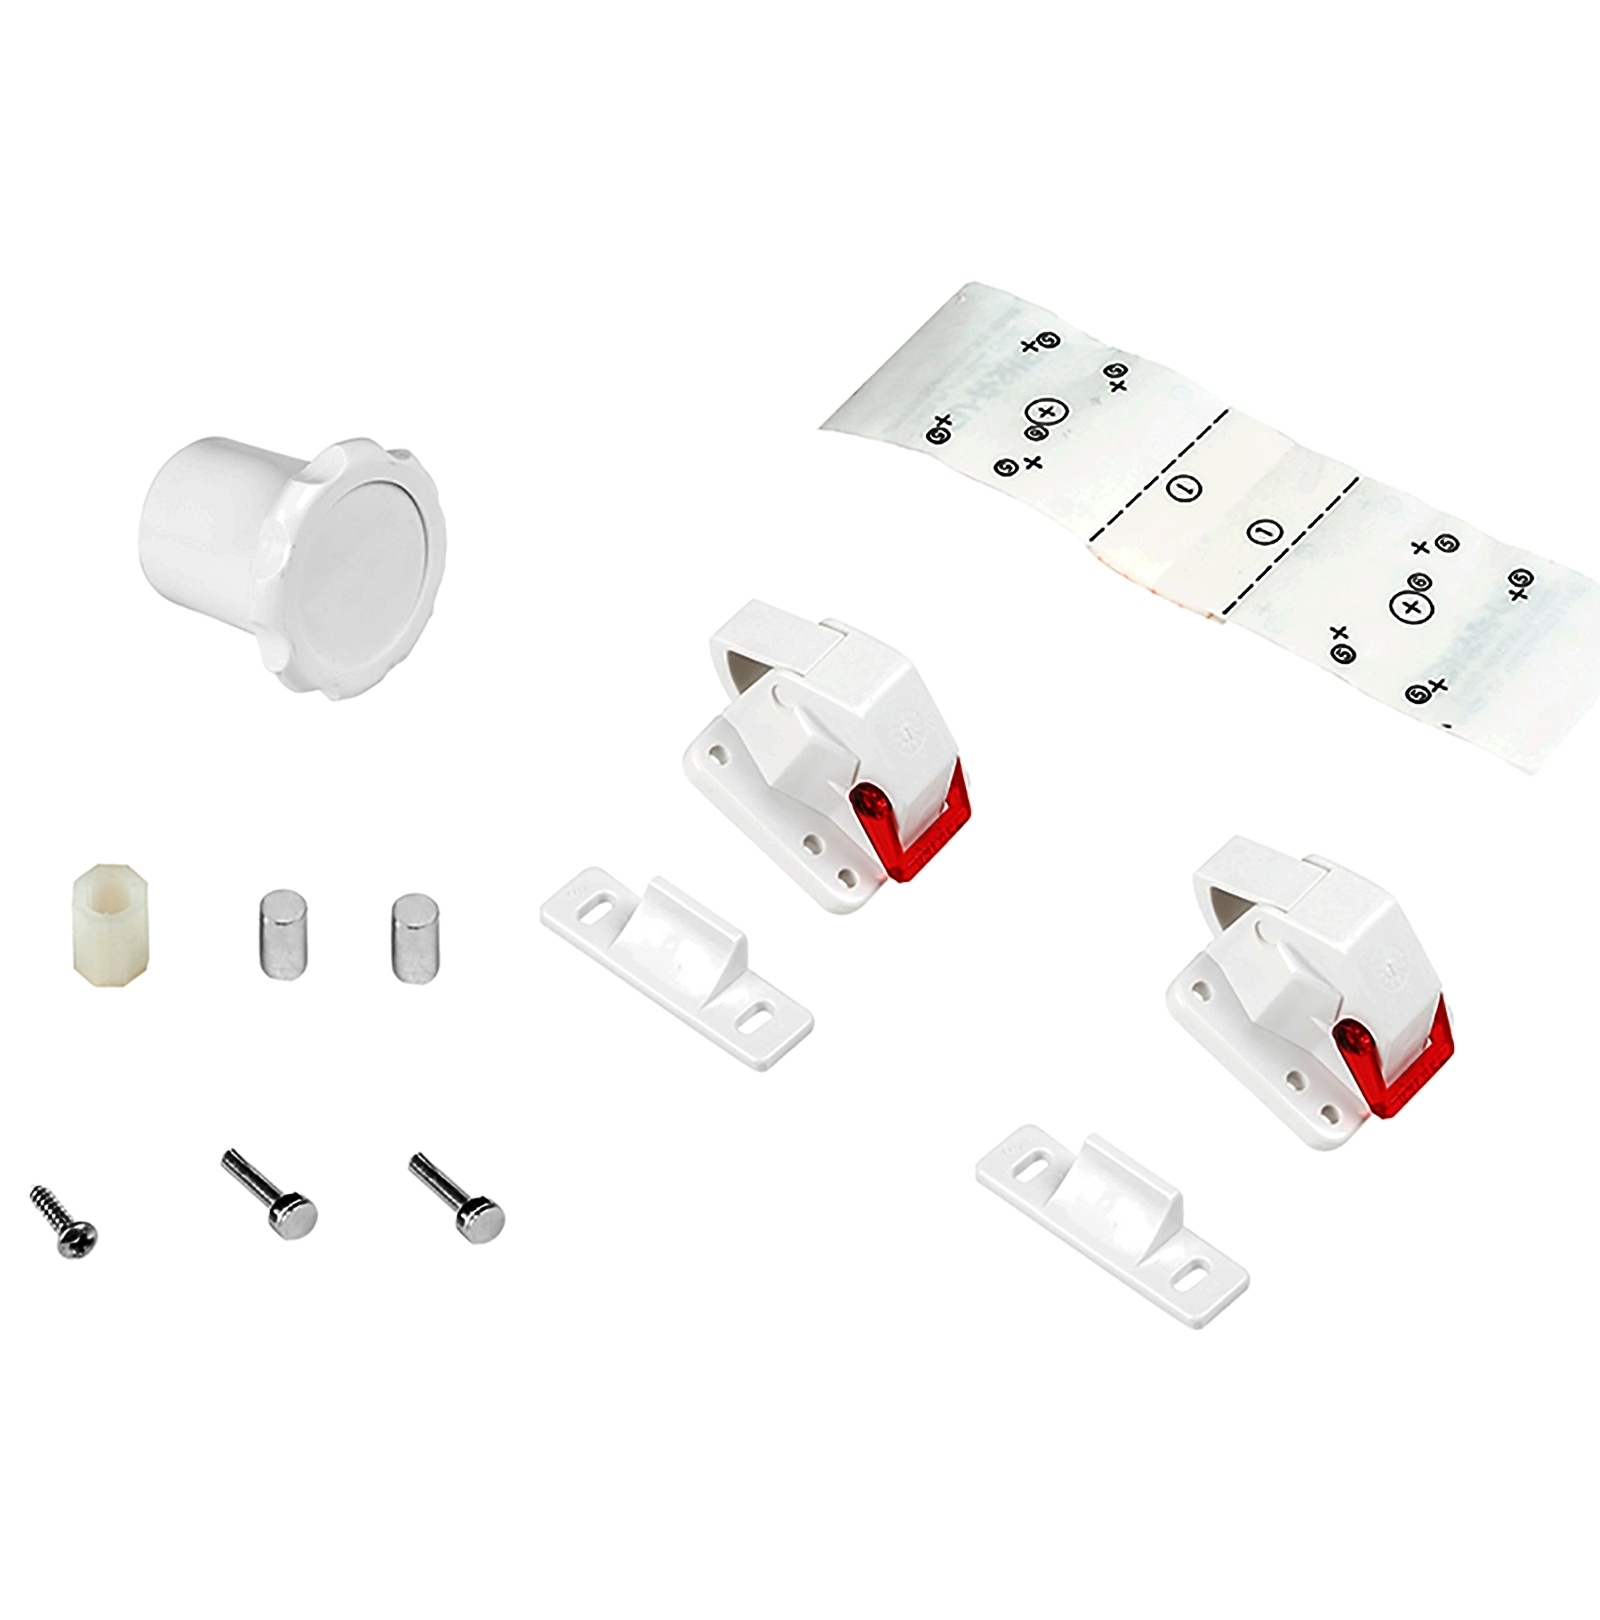 2pcs magnetic lock invisible security lock child lock for cabinet doors and  drawers (2 locks + 1 magnetic key) 8932920. Magnetic lock REVALOC made of  metal and plastic, white, for office furniture